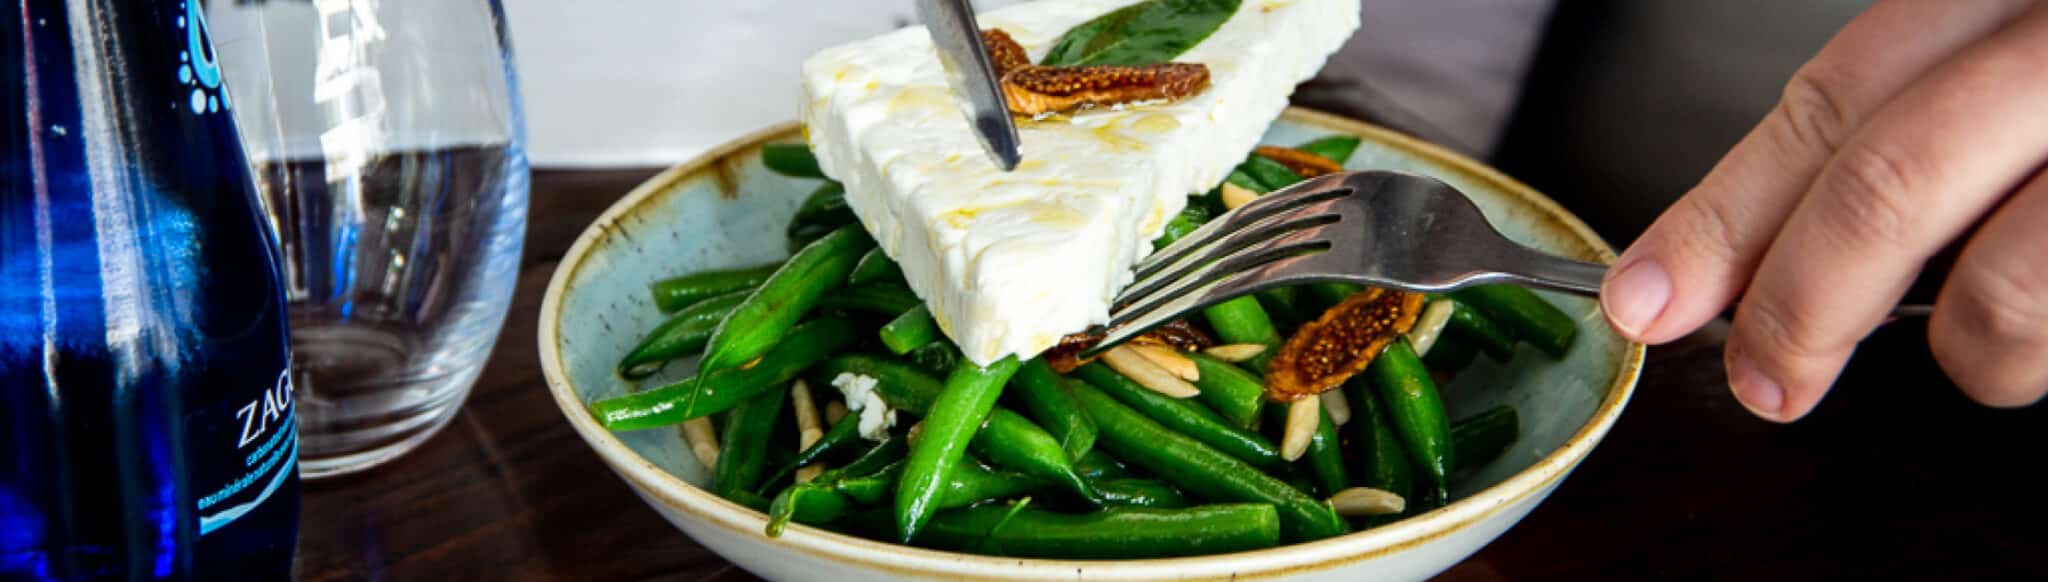 Our green bean salad is back!